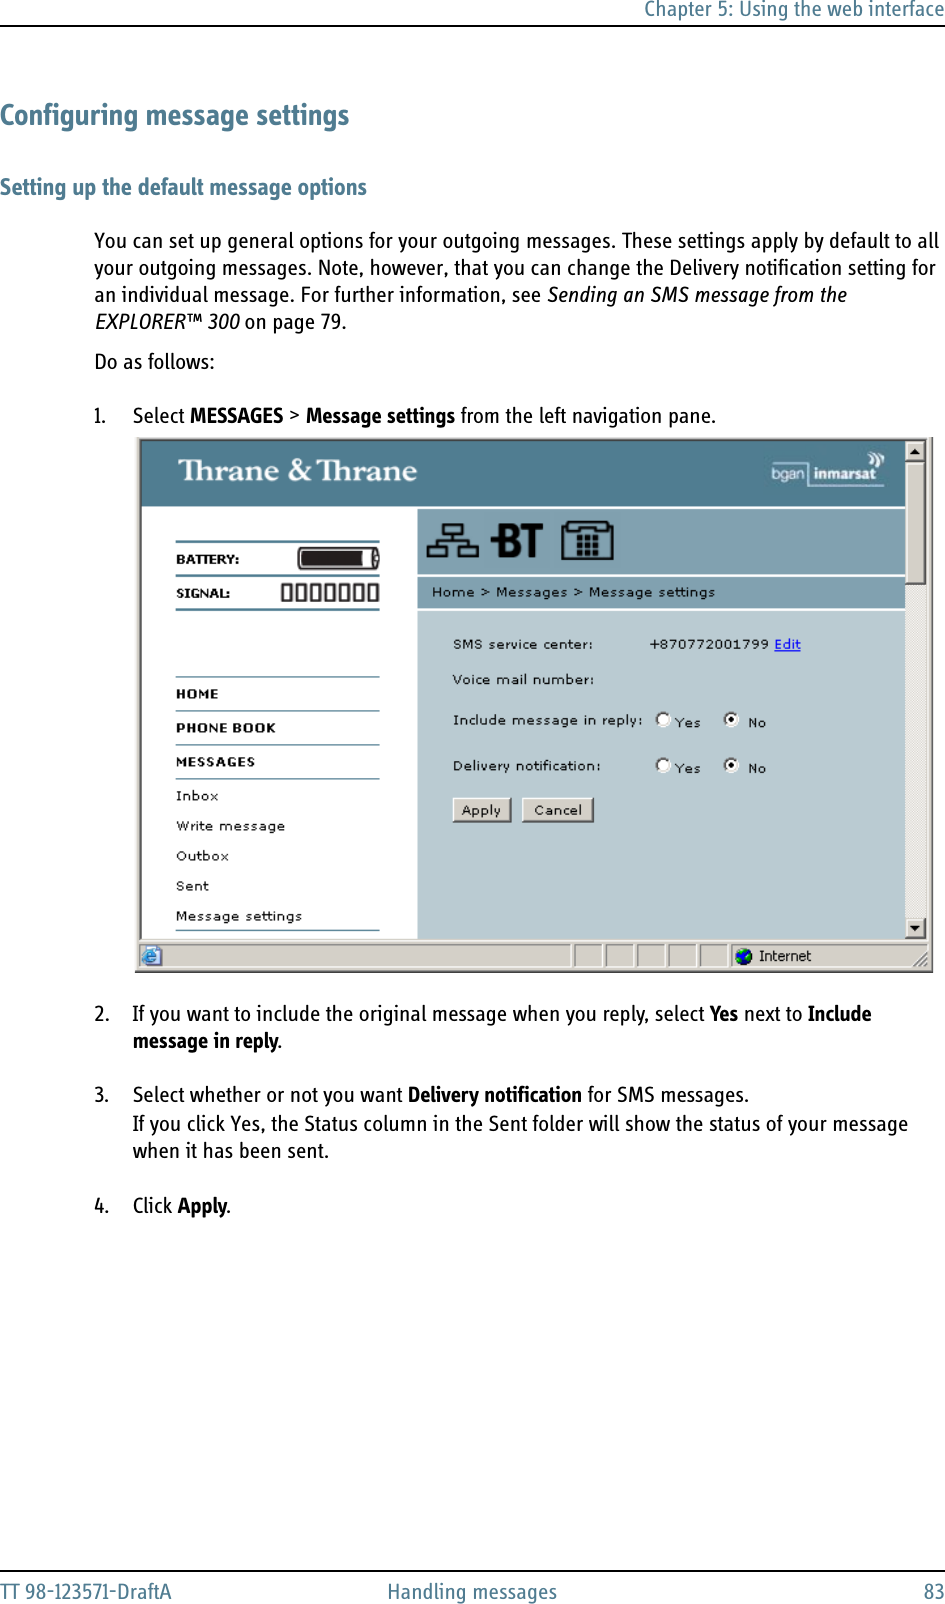 Chapter 5: Using the web interfaceTT 98-123571-DraftA Handling messages 83Configuring message settingsSetting up the default message optionsYou can set up general options for your outgoing messages. These settings apply by default to all your outgoing messages. Note, however, that you can change the Delivery notification setting for an individual message. For further information, see Sending an SMS message from the EXPLORER™ 300 on page 79.Do as follows:1. Select MESSAGES &gt; Message settings from the left navigation pane.2. If you want to include the original message when you reply, select Yes next to Include message in reply.3. Select whether or not you want Delivery notification for SMS messages. If you click Yes, the Status column in the Sent folder will show the status of your message when it has been sent.4. Click Apply.